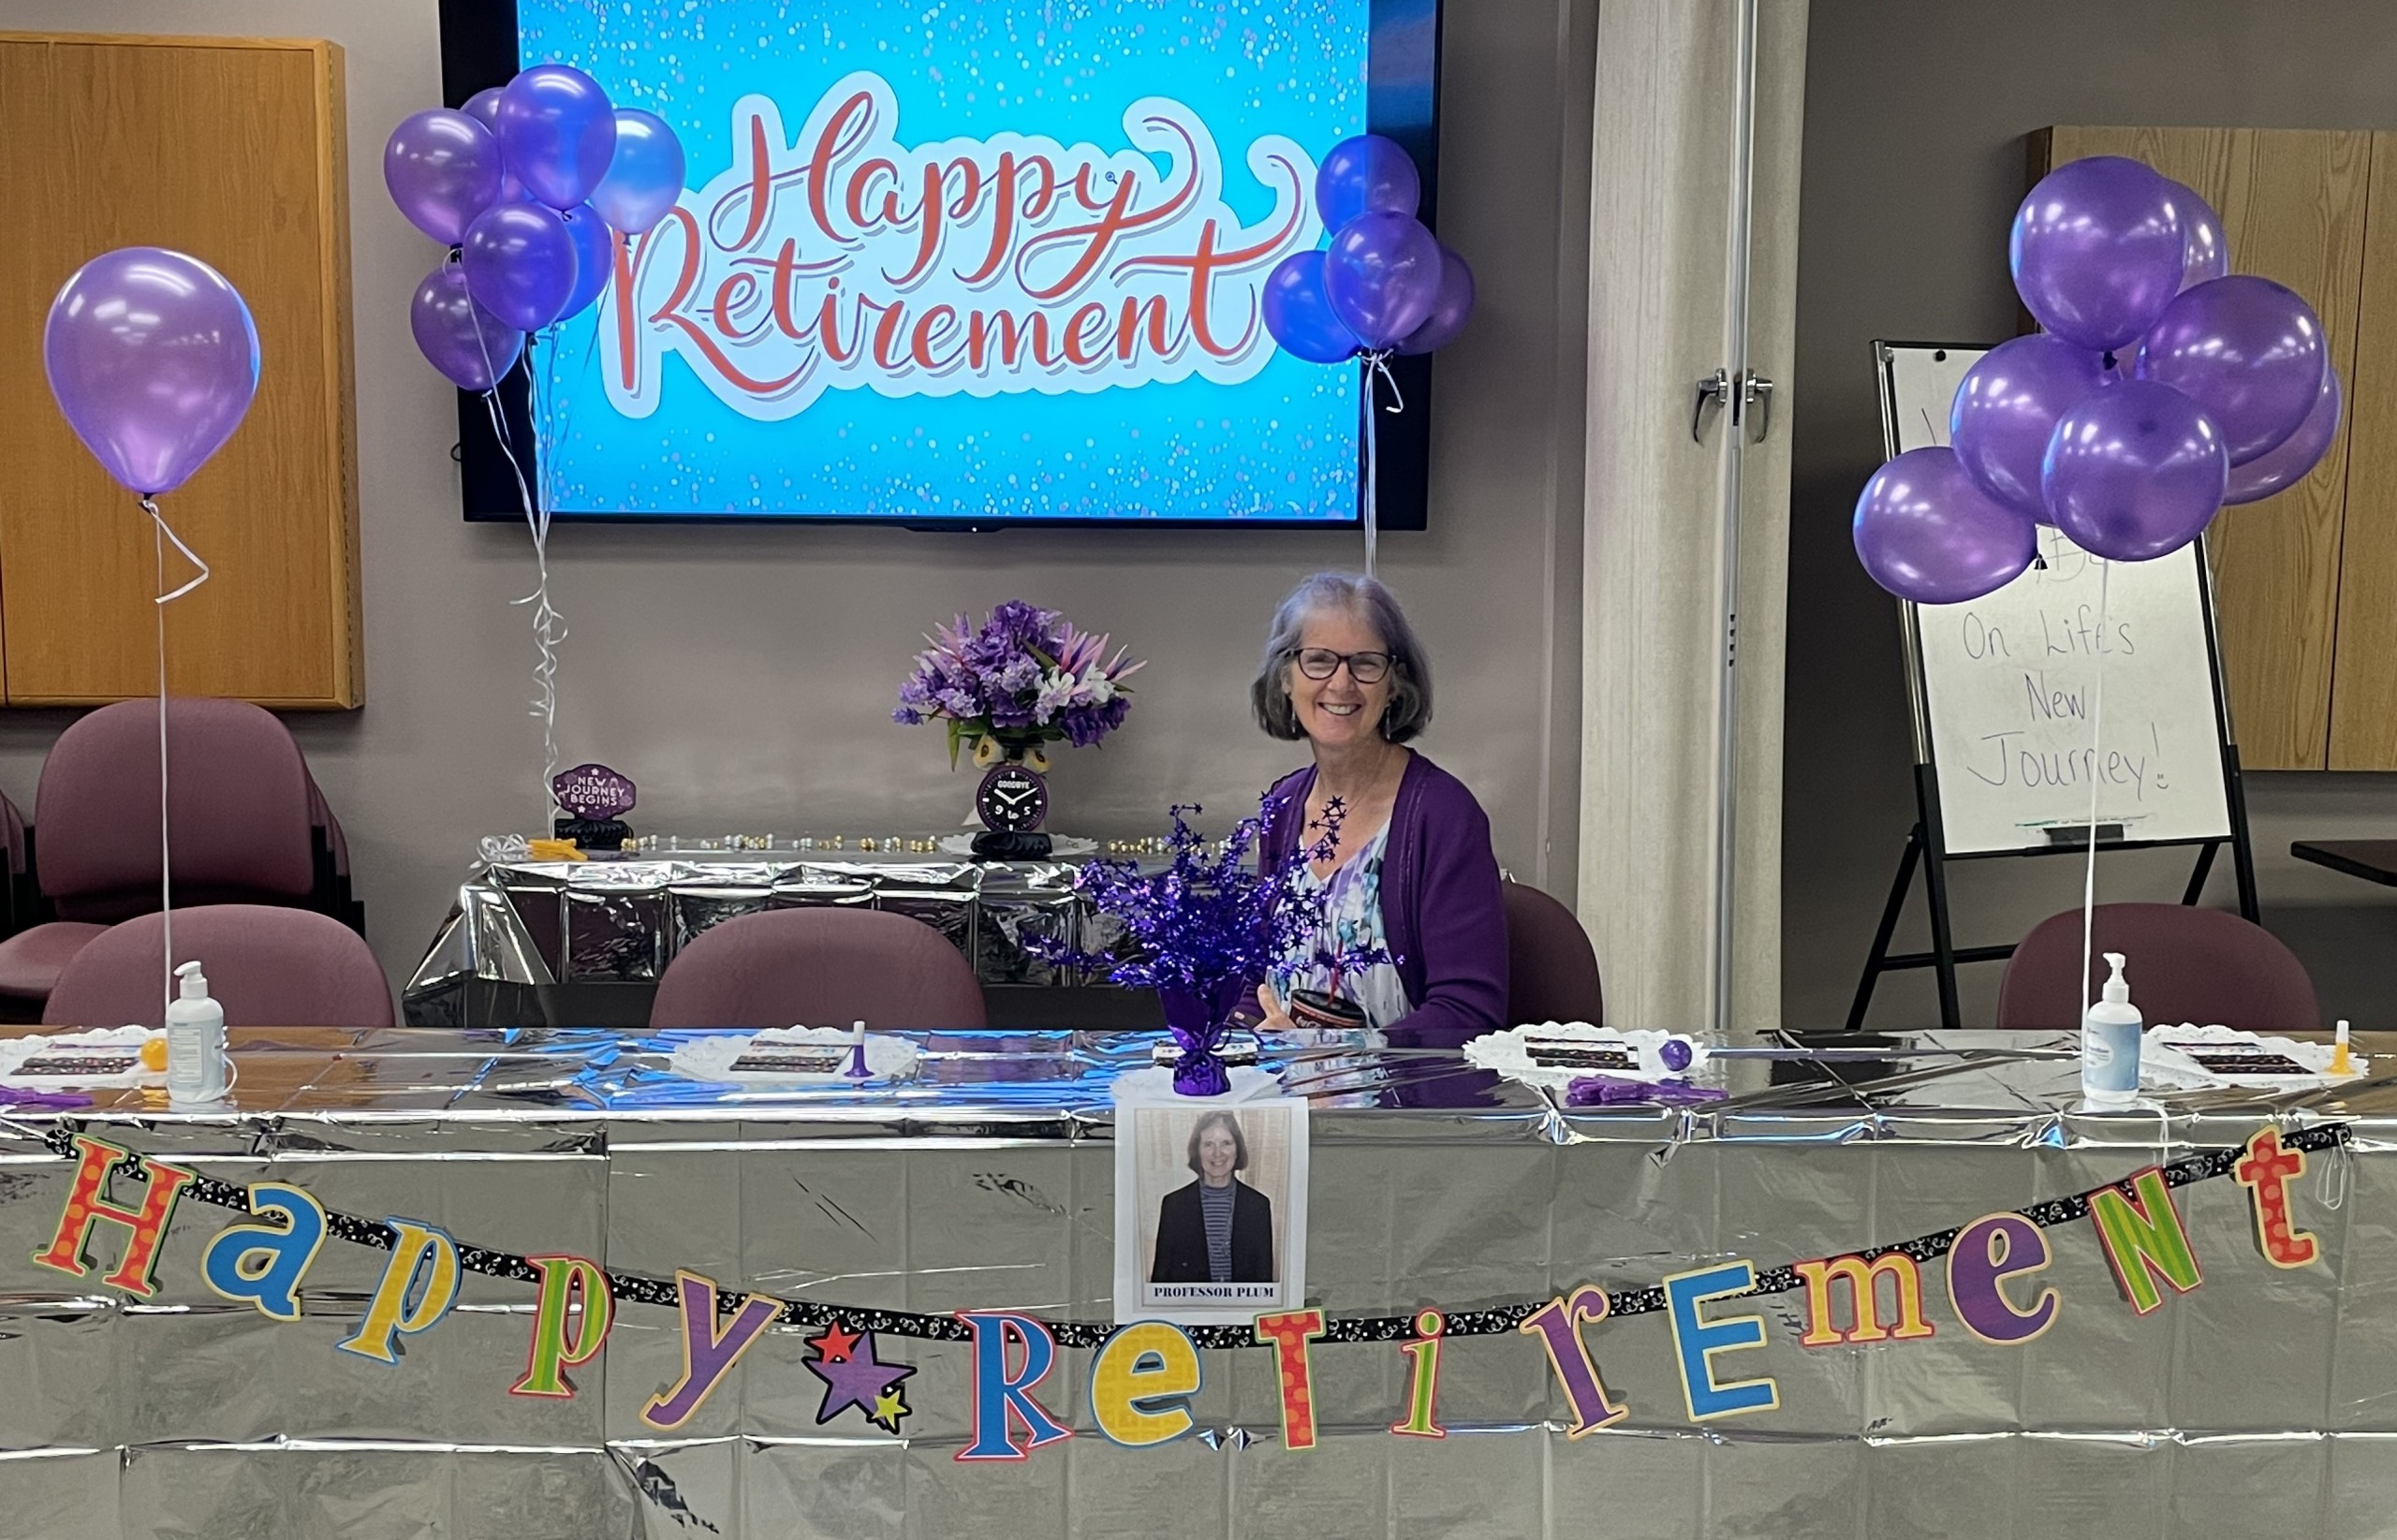 Dr. Angela Ray sitting in front of colorful banner that says Happy Retirement